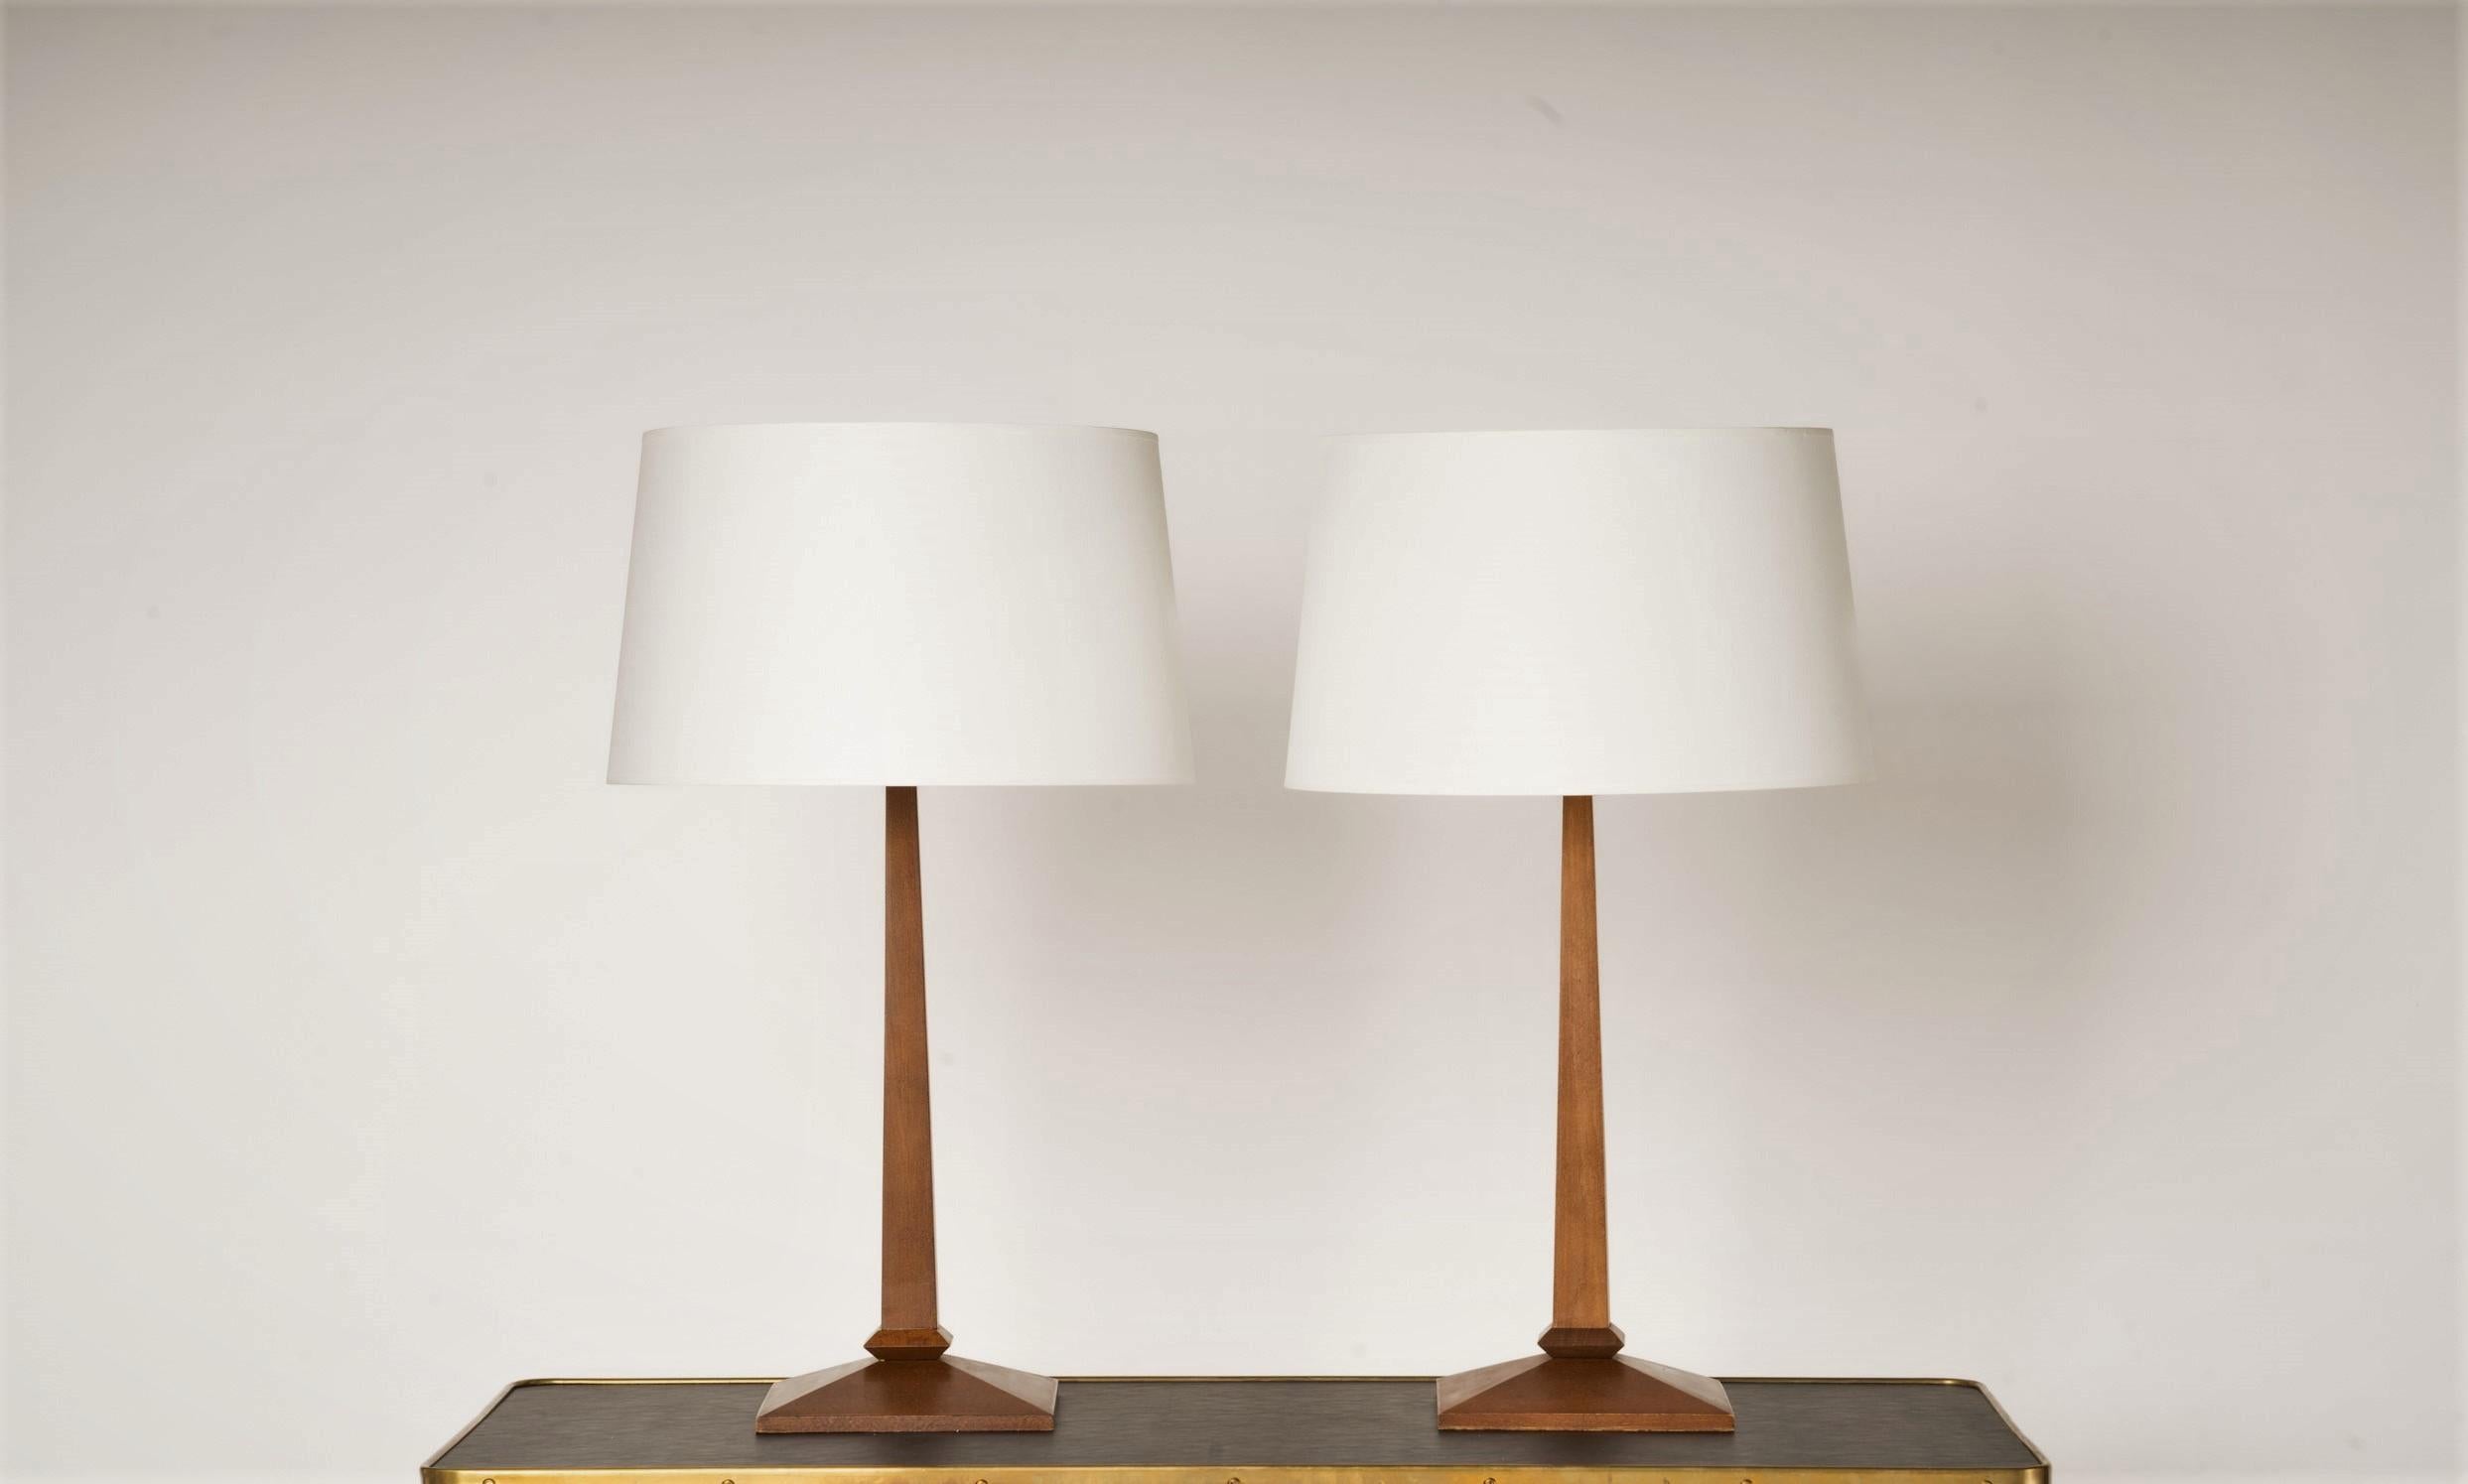 Sleek minimalist design wooden table lamp. European socket and wiring. 
Minor marking on bases. One of the lamp's pole is slightly lighter than on the other lamp.
These lamps will ship from France and can be returned to either France or to a LIC NY